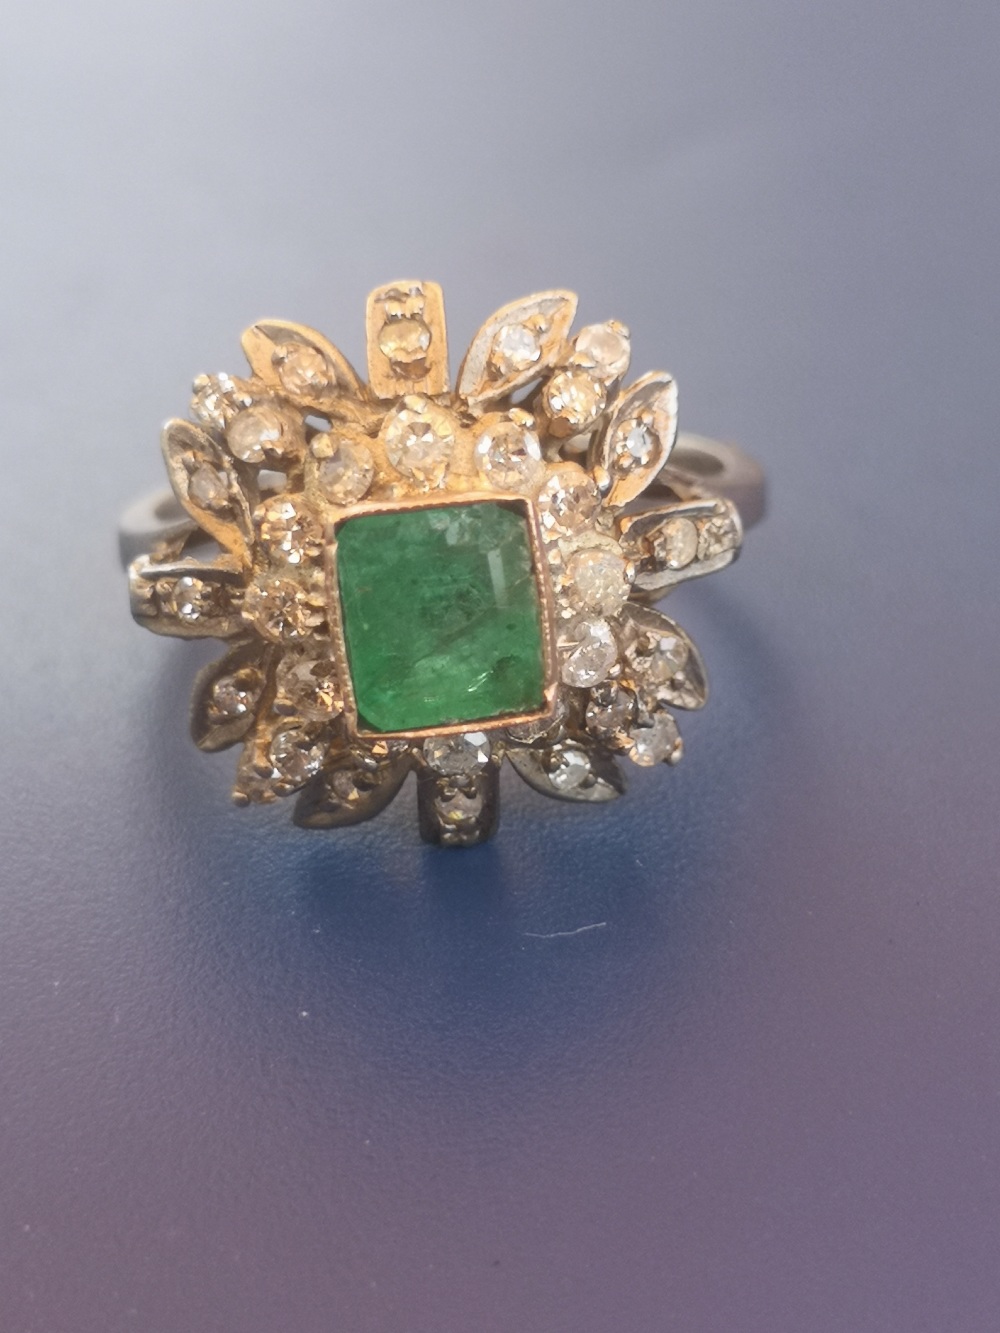 A modern emerald & diamond '750' cluster ring. Finger size P - emerald chipped.